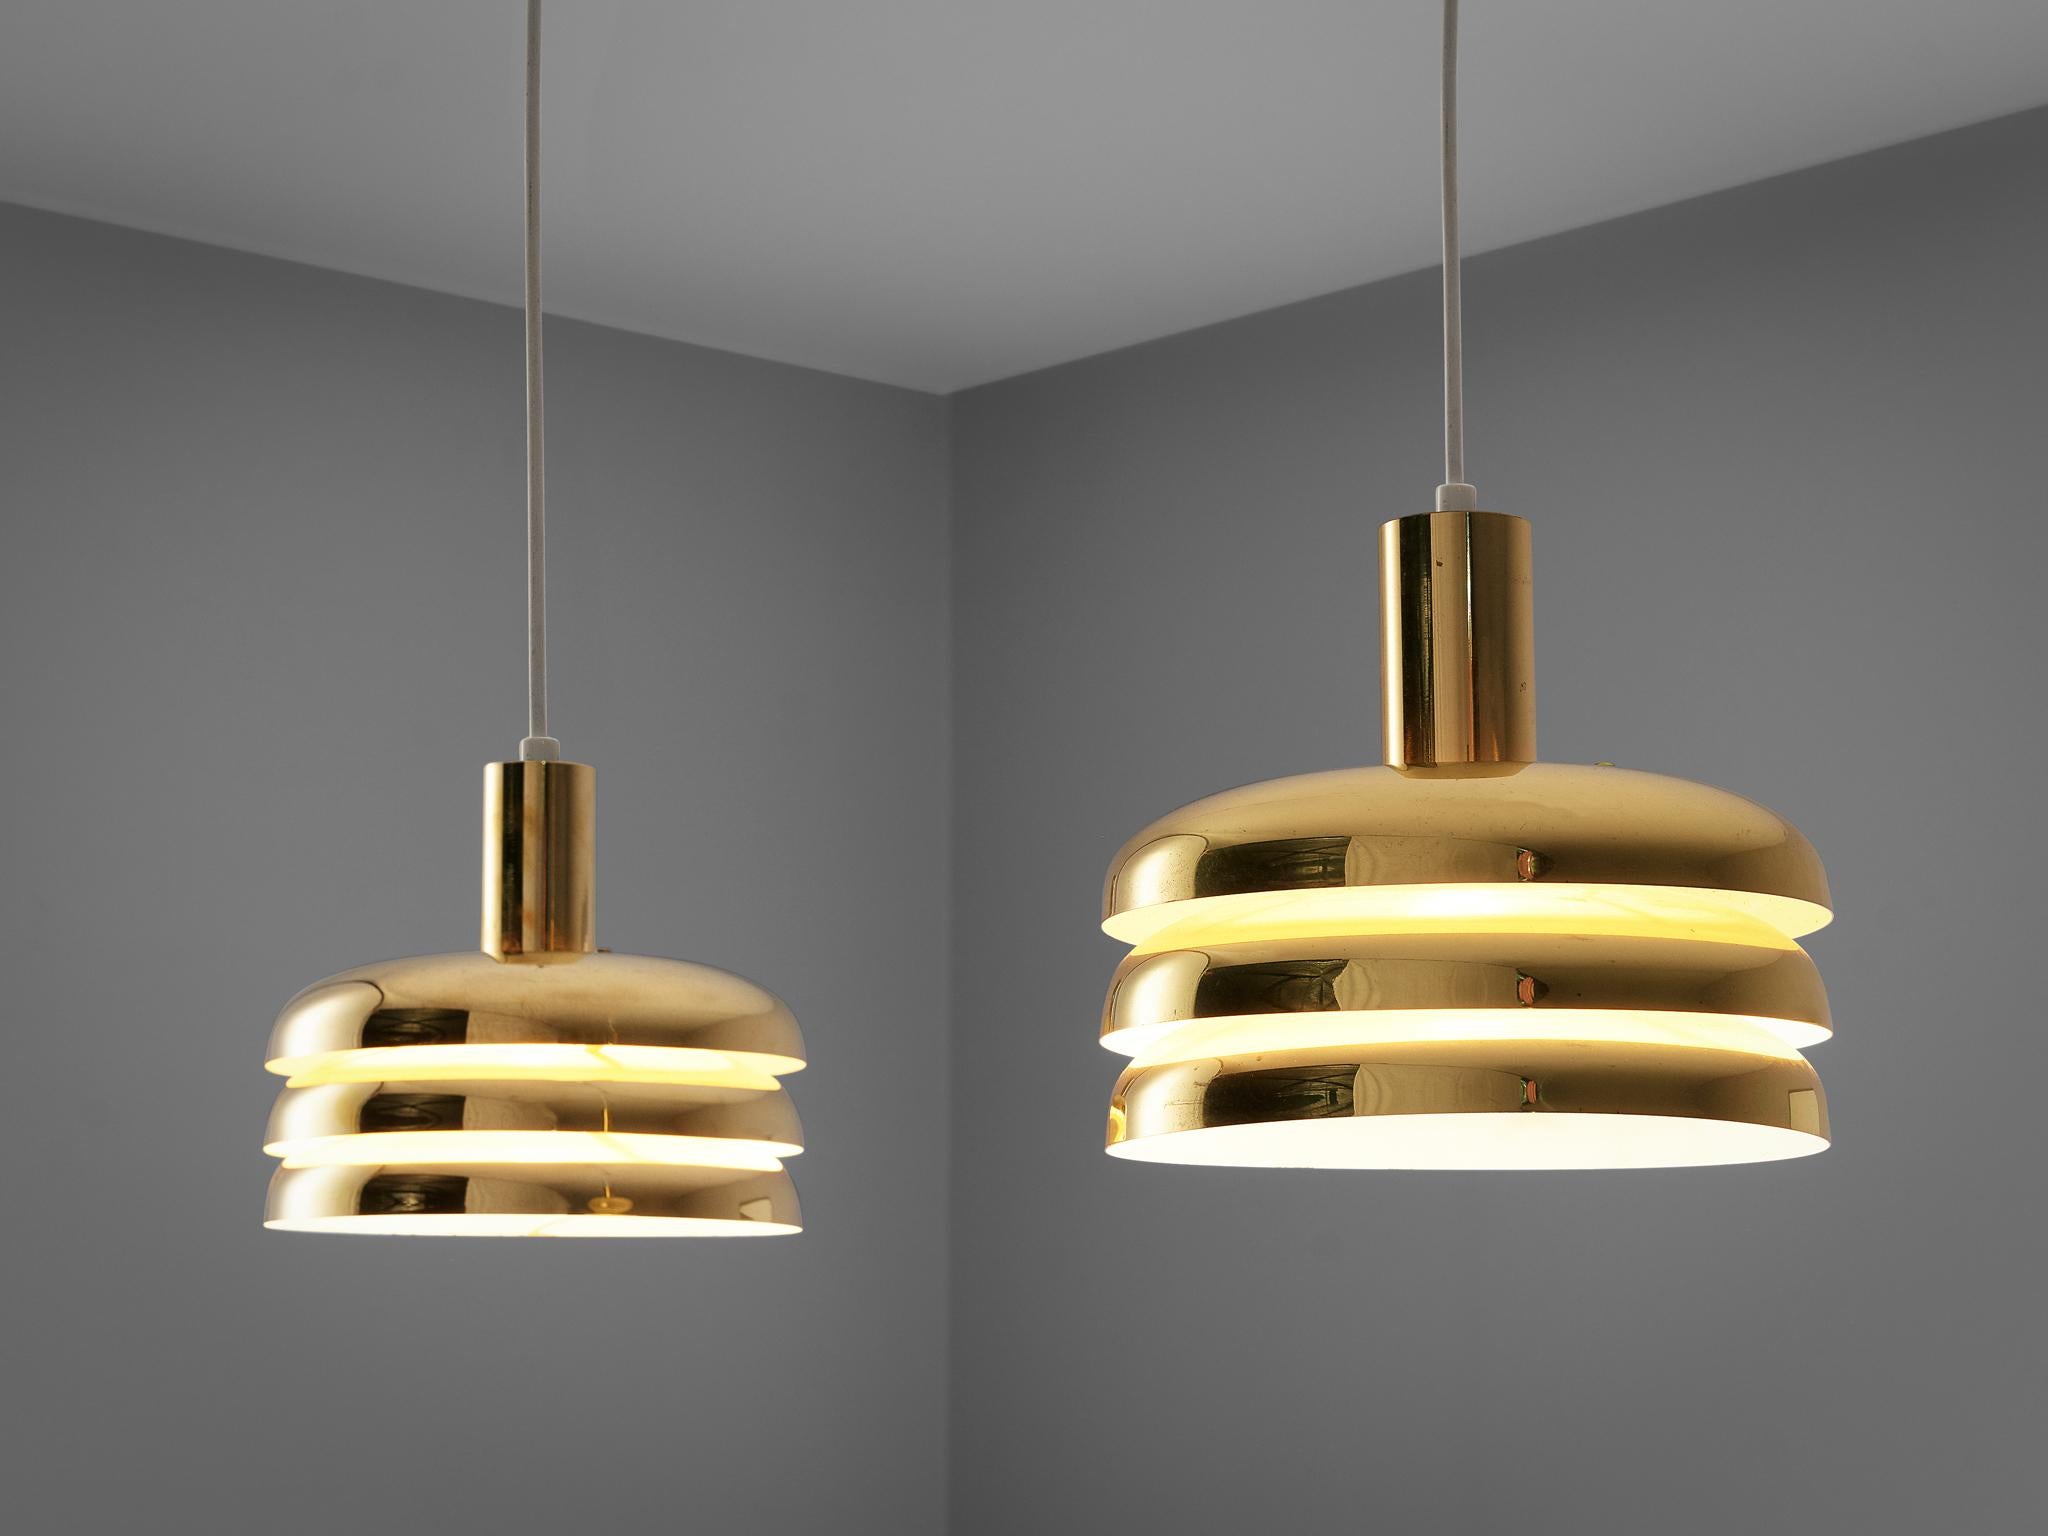 Hans-Agne Jakobsson, One 'T-724' Lamingo ceiling light, brass, Sweden, 1960s.

This wonderful 'Lamingo' ceiling lamp is designed by Hans-Agne Jakobsson for or AB Markaryd. The pendant is in very good condition and has a subtle patina on the brass